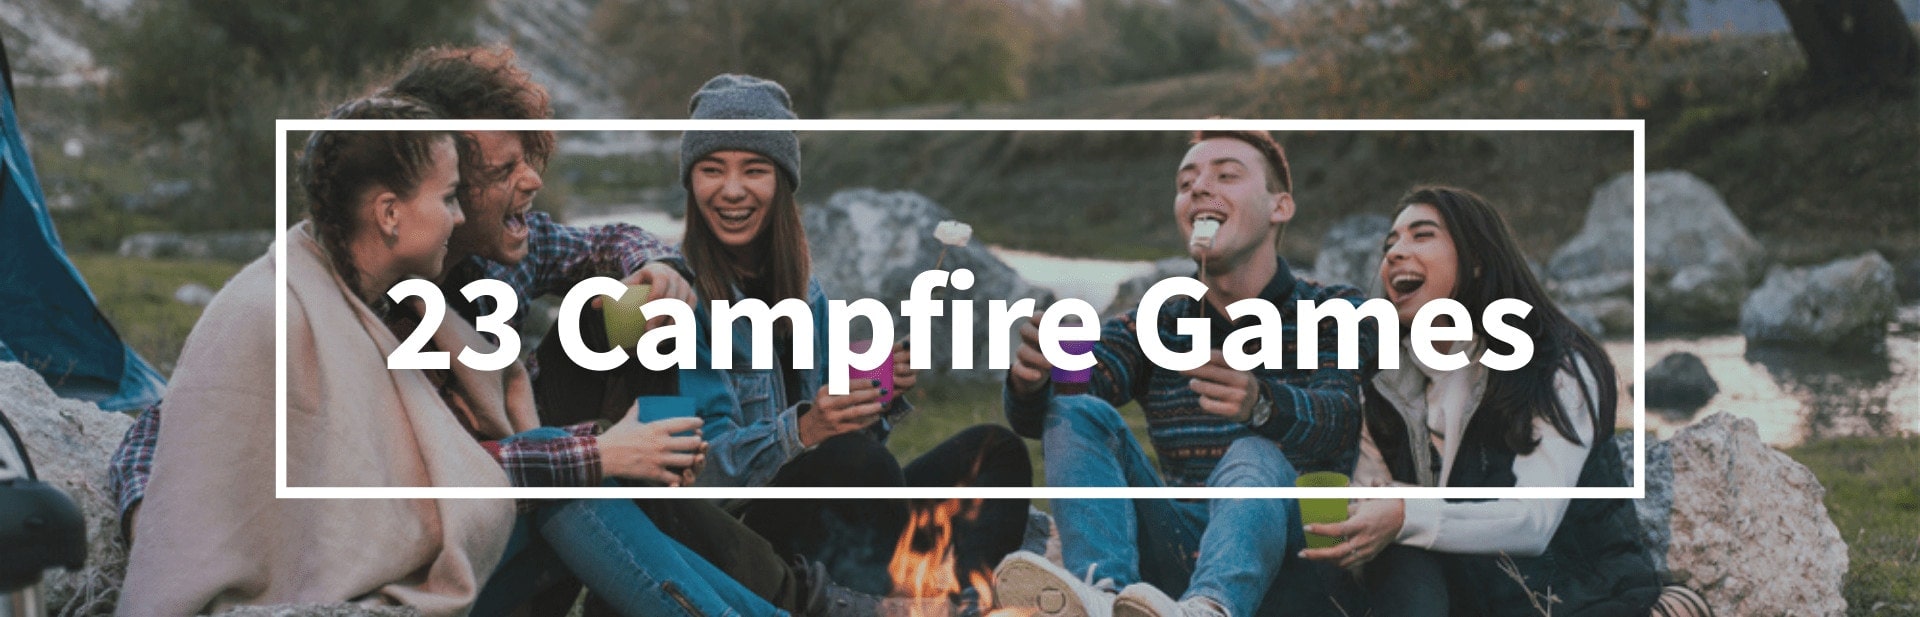 23 Campfire Games To Get Everyone Laughing On Your Next Camping Trip